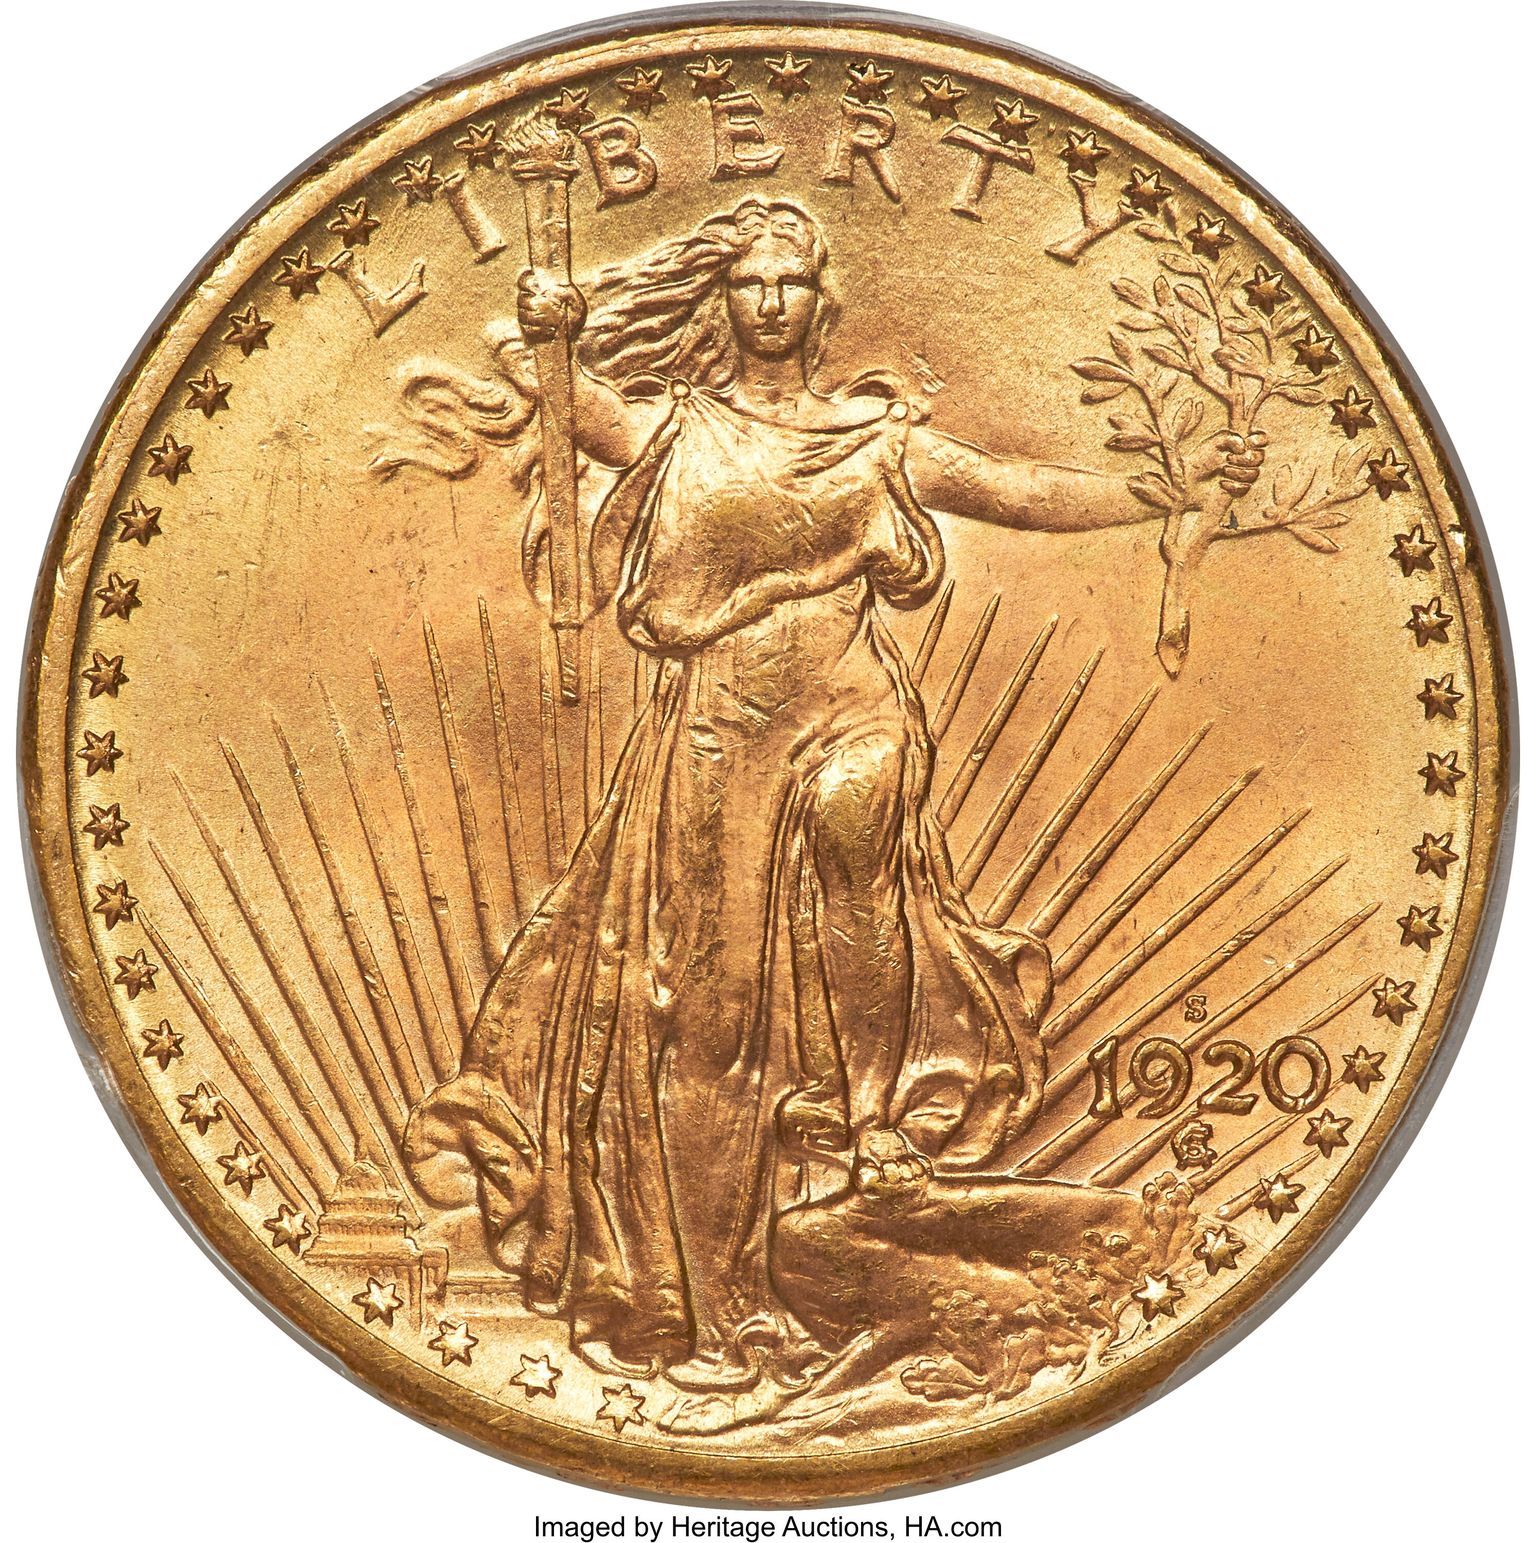 1920 S Double Eagle. Imaged by Heritage Auctions, HA.com